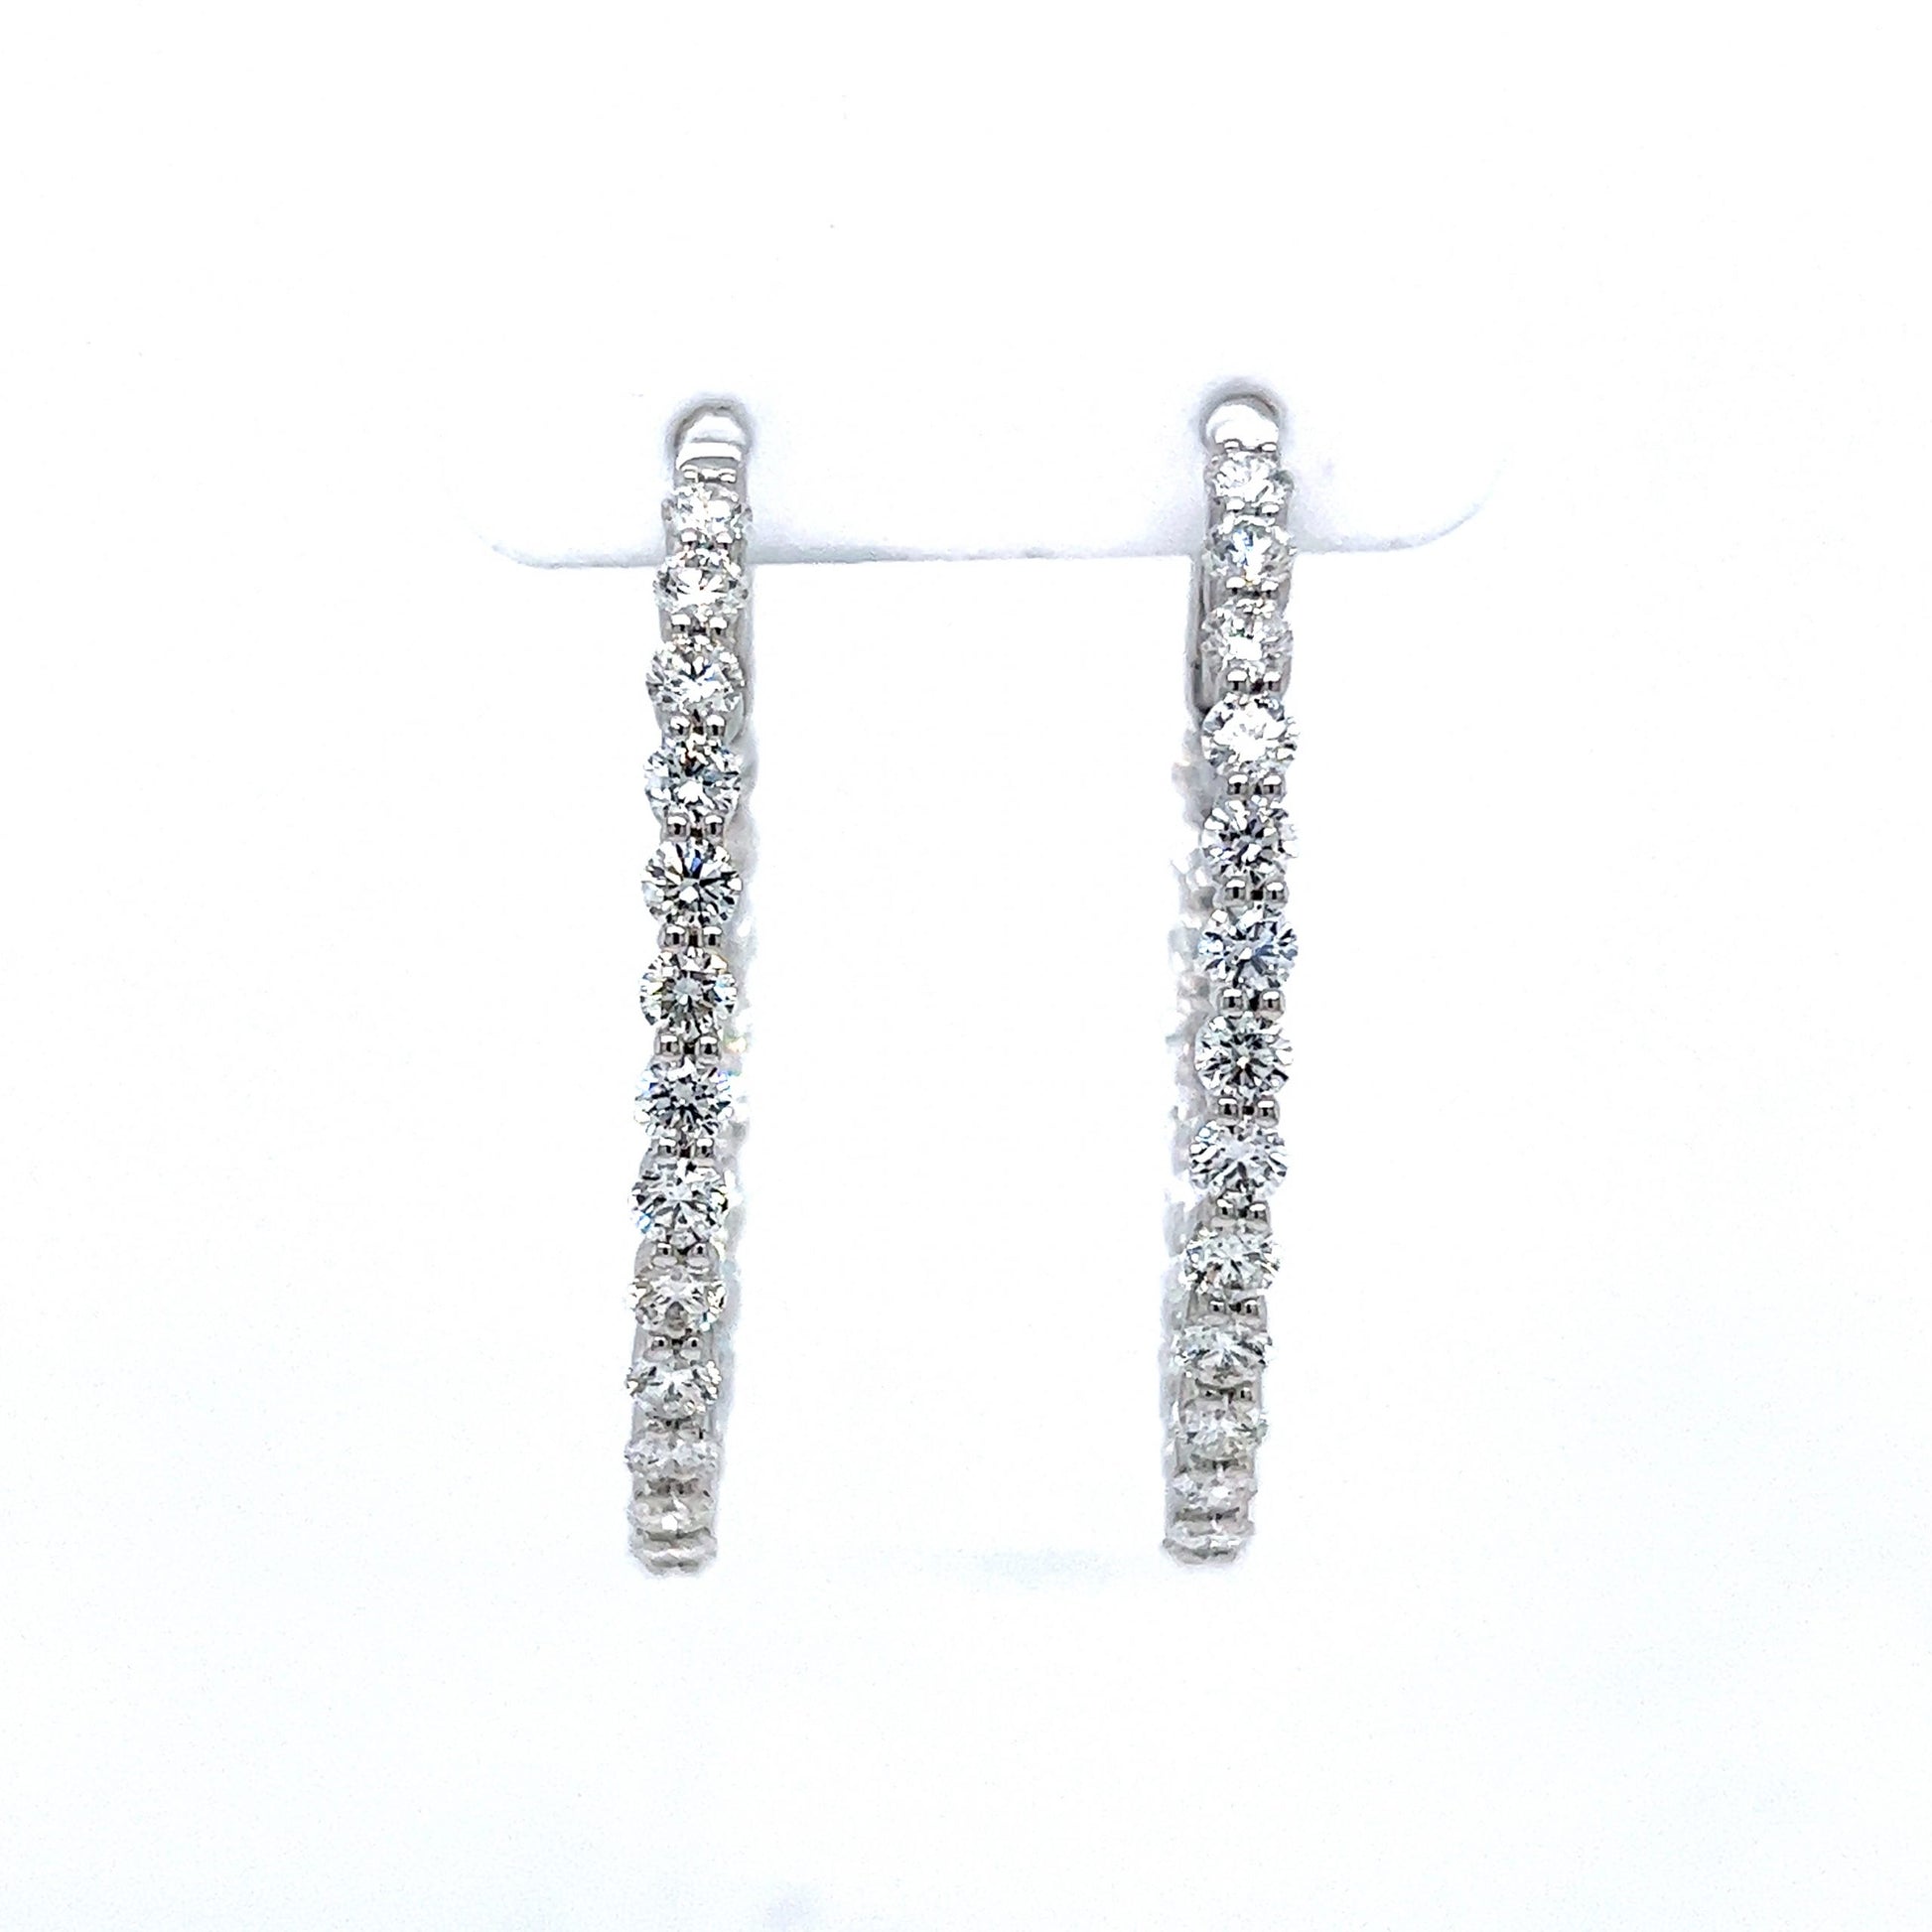 Stylish Silver Triple Line Stud Earrings The ICONIC